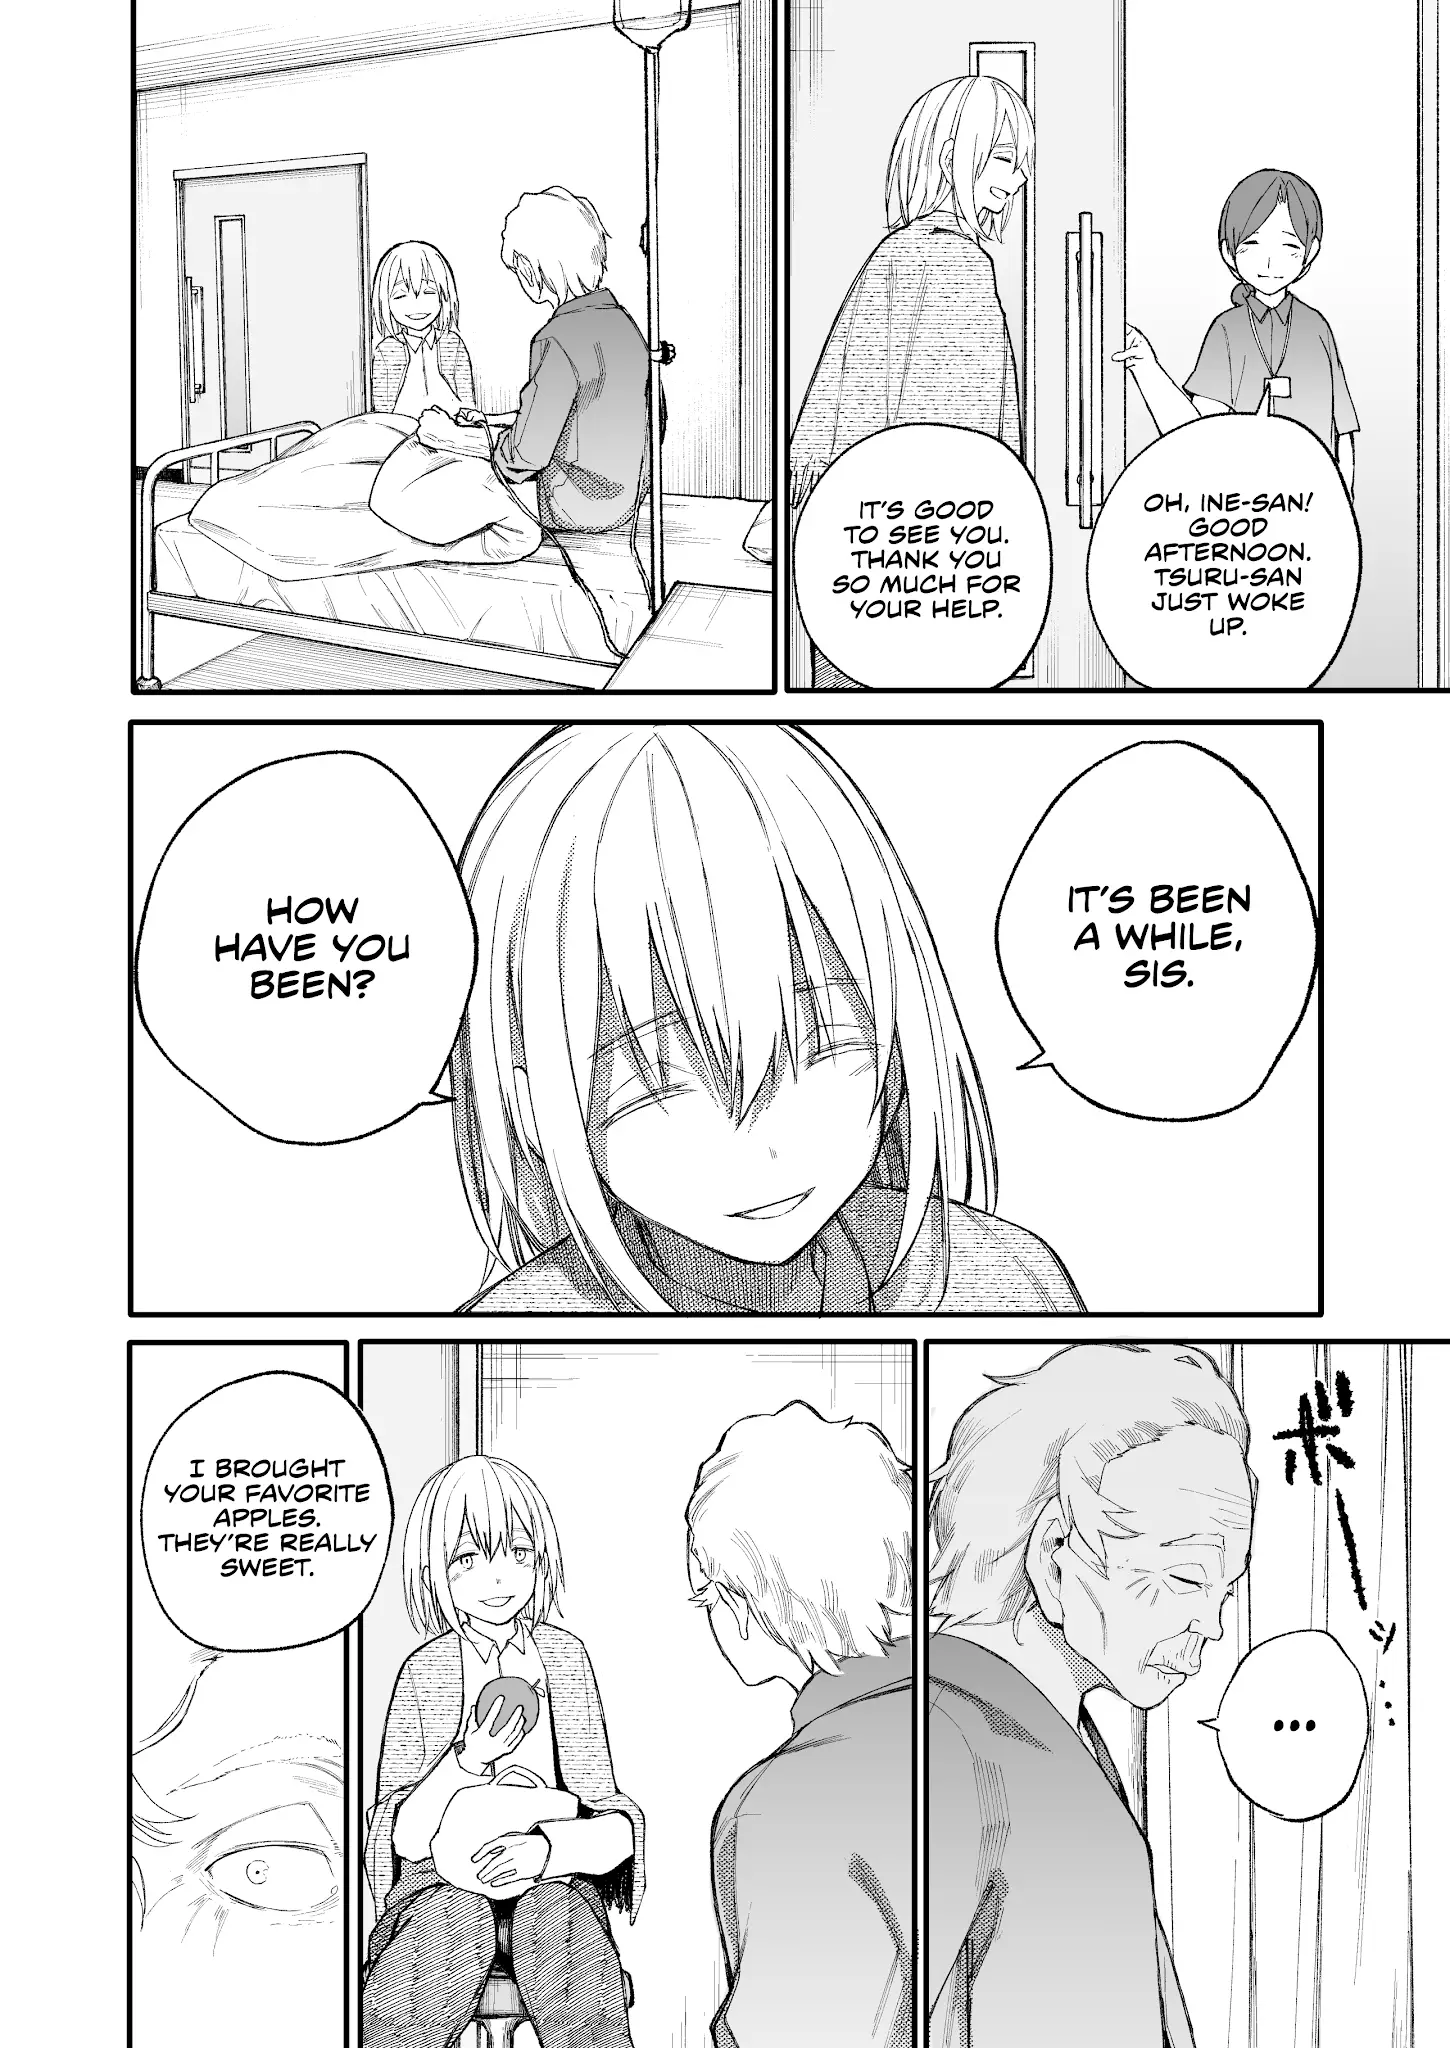 A Story About A Grampa And Granma Returned Back To Their Youth. - 32 page 2